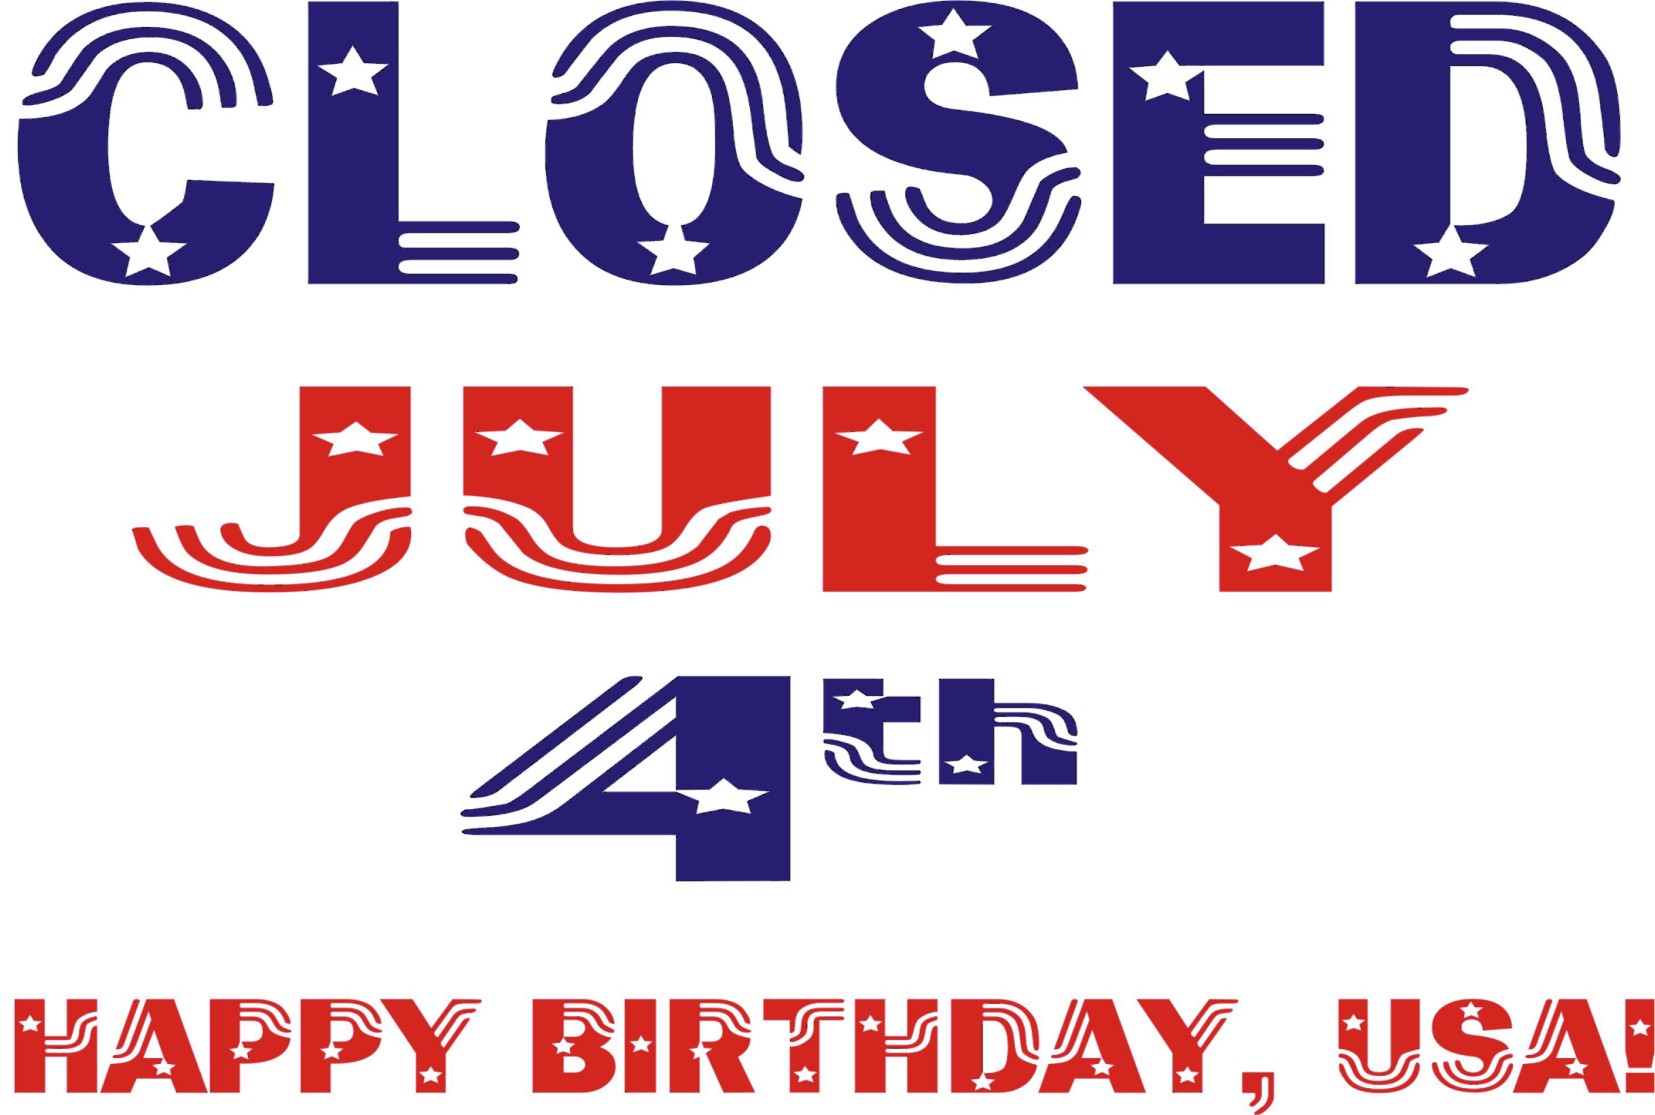 Be Closed July 4th And 5th This Week In Honor Of Independence Day  We    